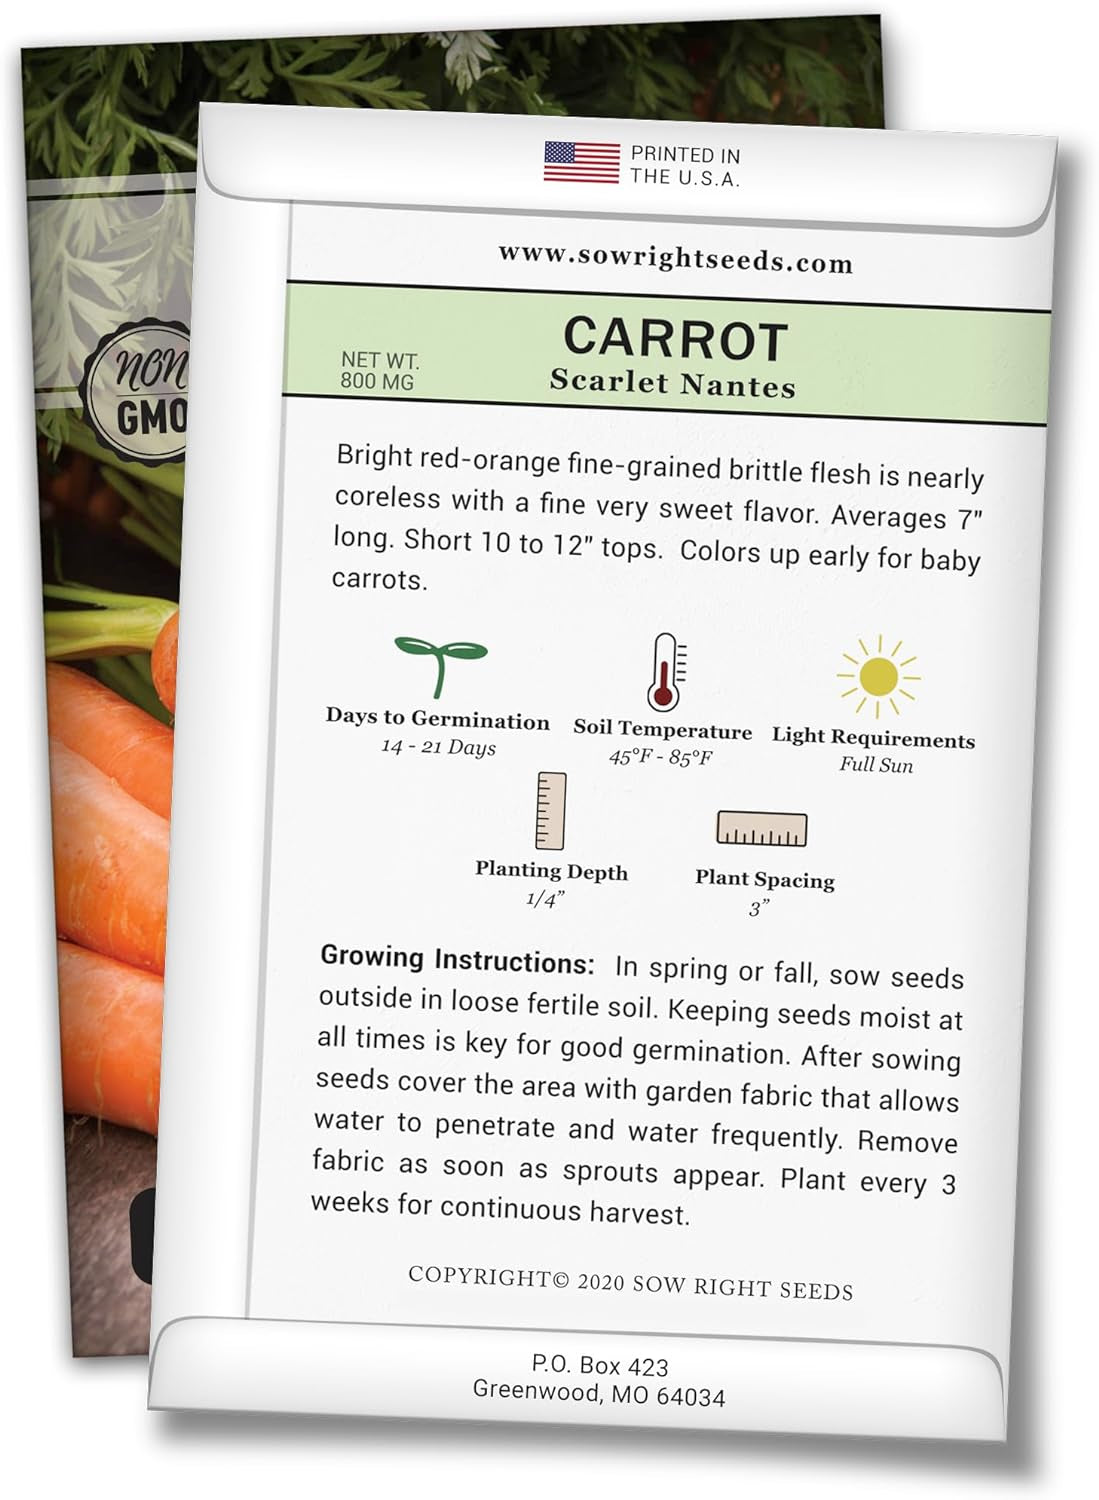 - Scarlet Nantes Carrot Seed for Planting - Non-Gmo Heirloom Packet with Instructions to Plant a Home Vegetable Garden - Indoors or Outdoor - Sweet and Vibrant Variety (1)